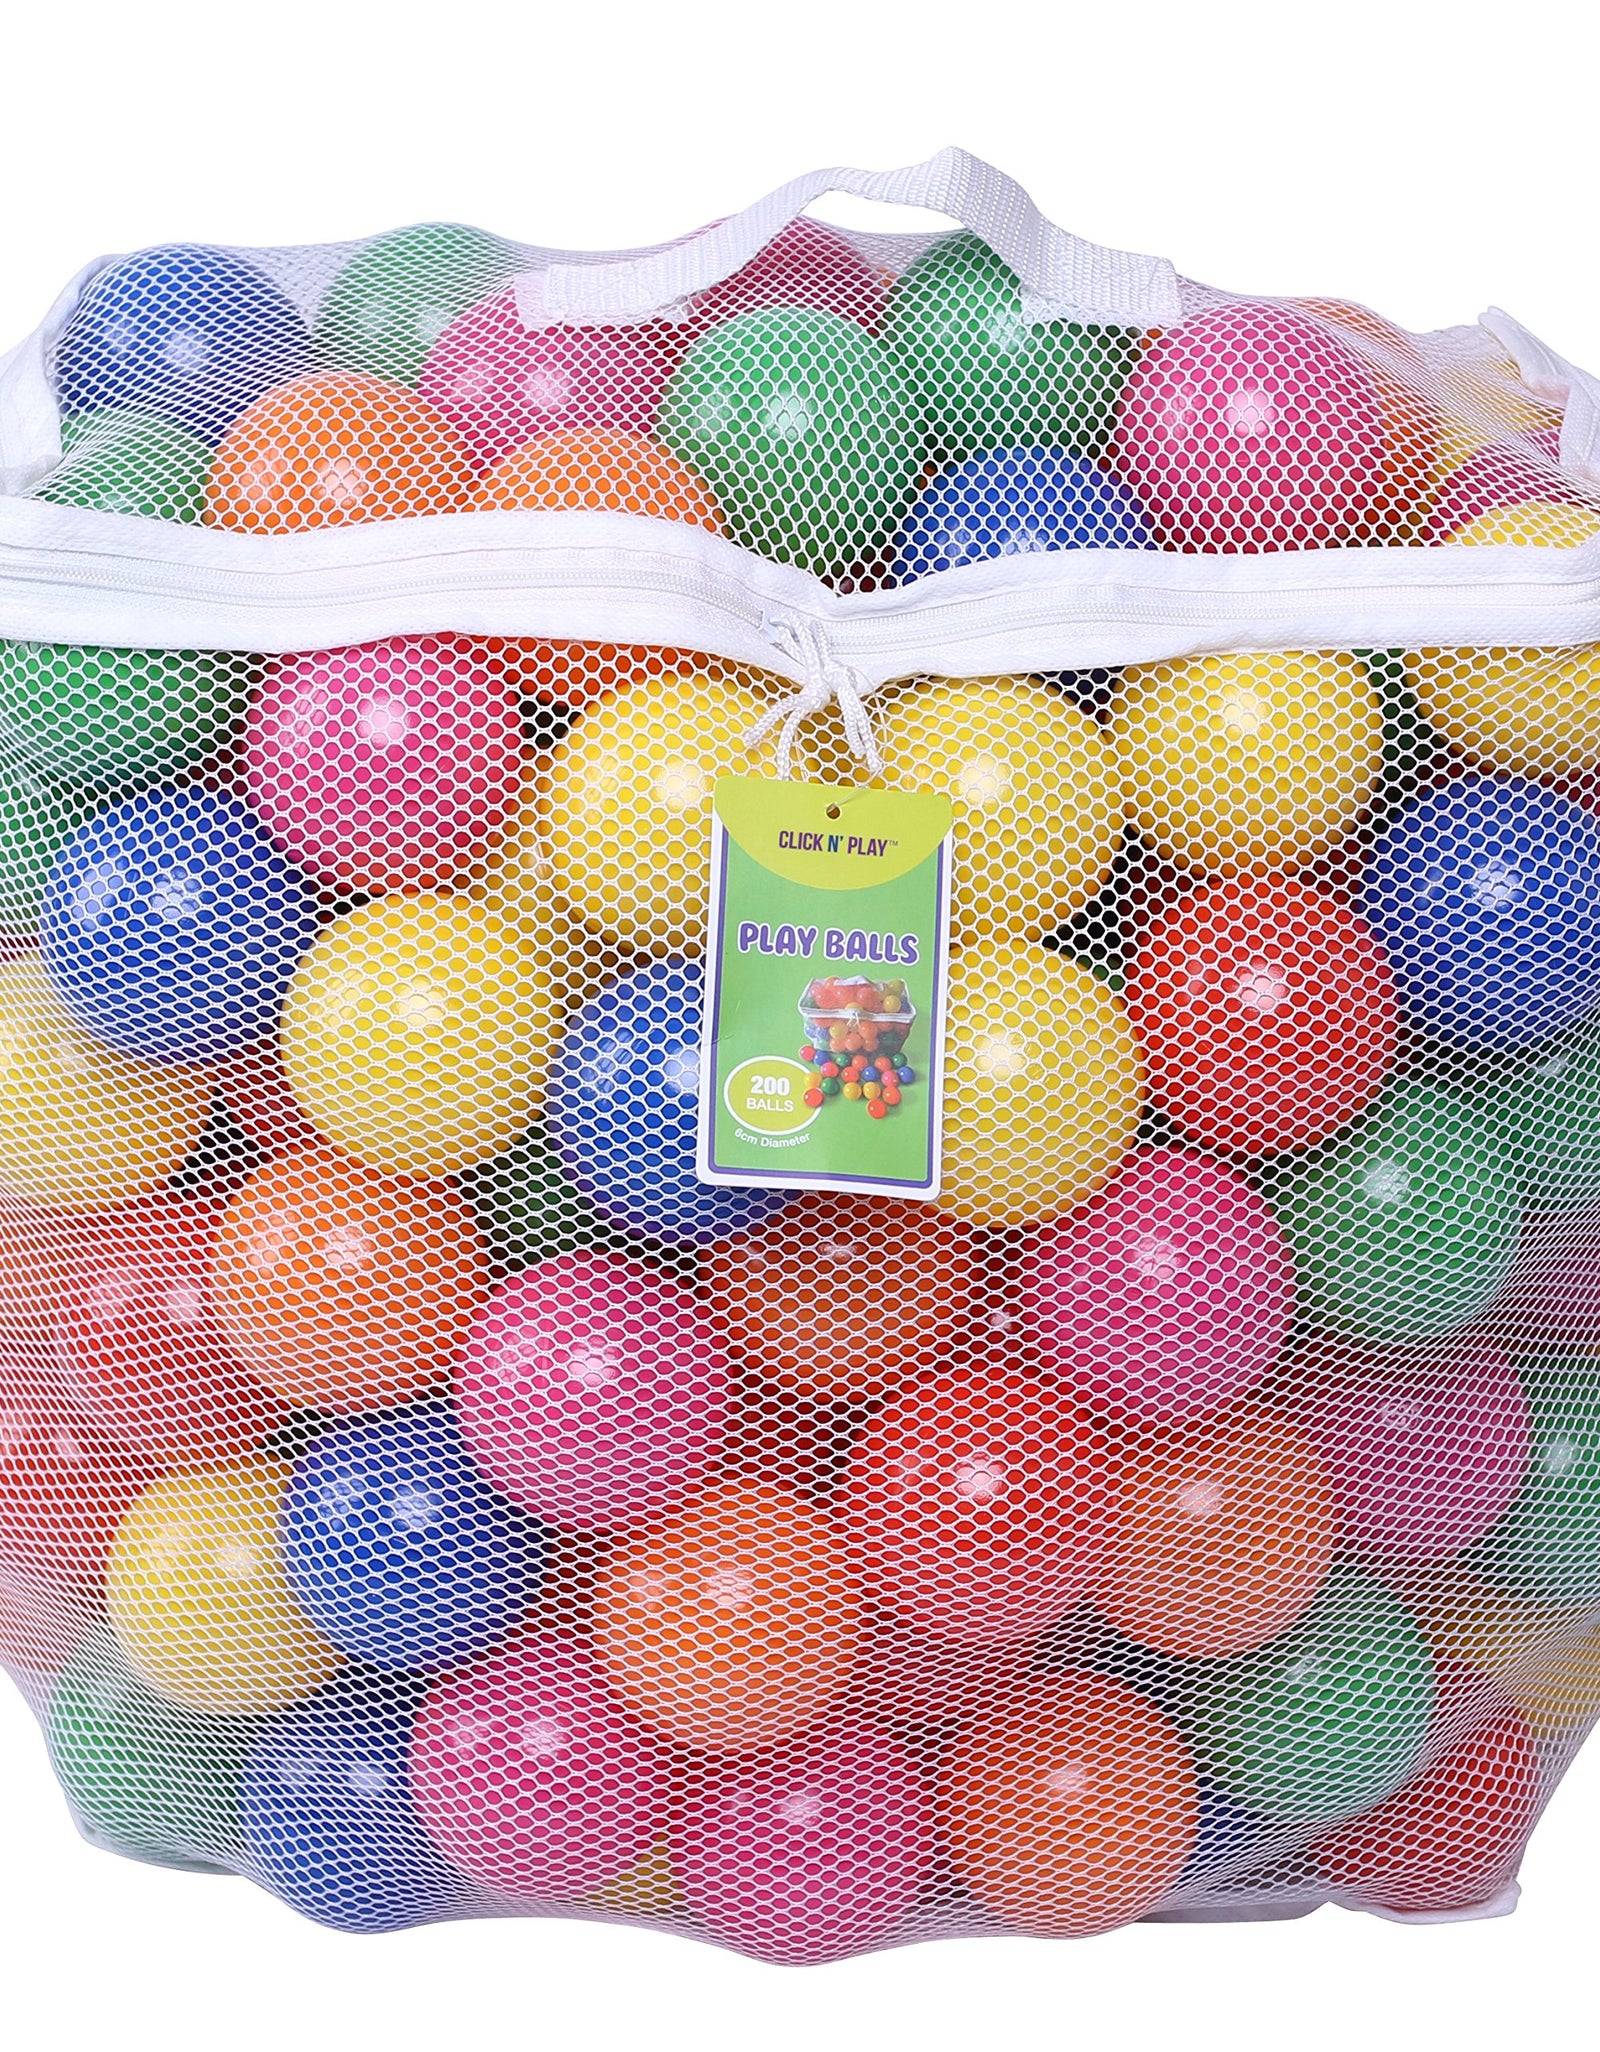 Plastic Ball Pit Balls for Toddlers, Click N' Play Ball Pit Balls 200 Pack, Phthalate and BPA Free, Includes a Reusable Storage Bag with Zipper, Gifts for Toddlers and Kids